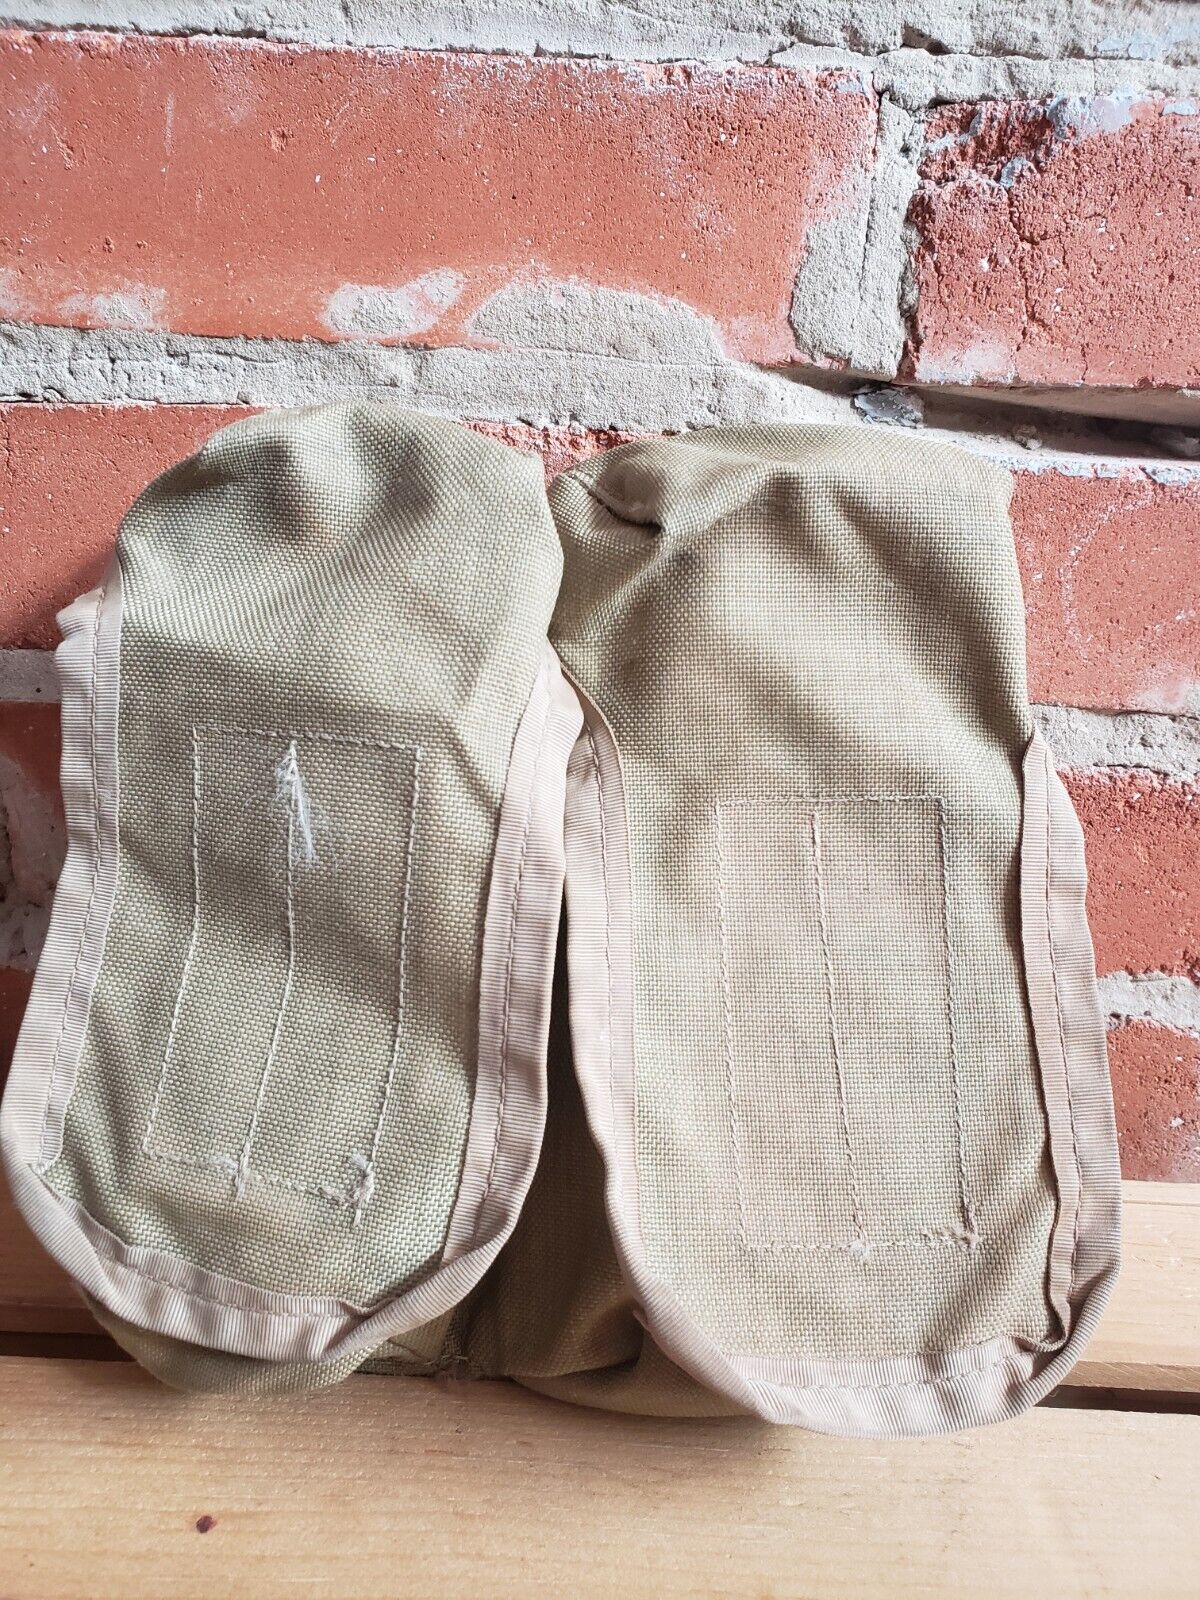 Pinky Tan Federal Covers 2x2 Mag Pouch Molle